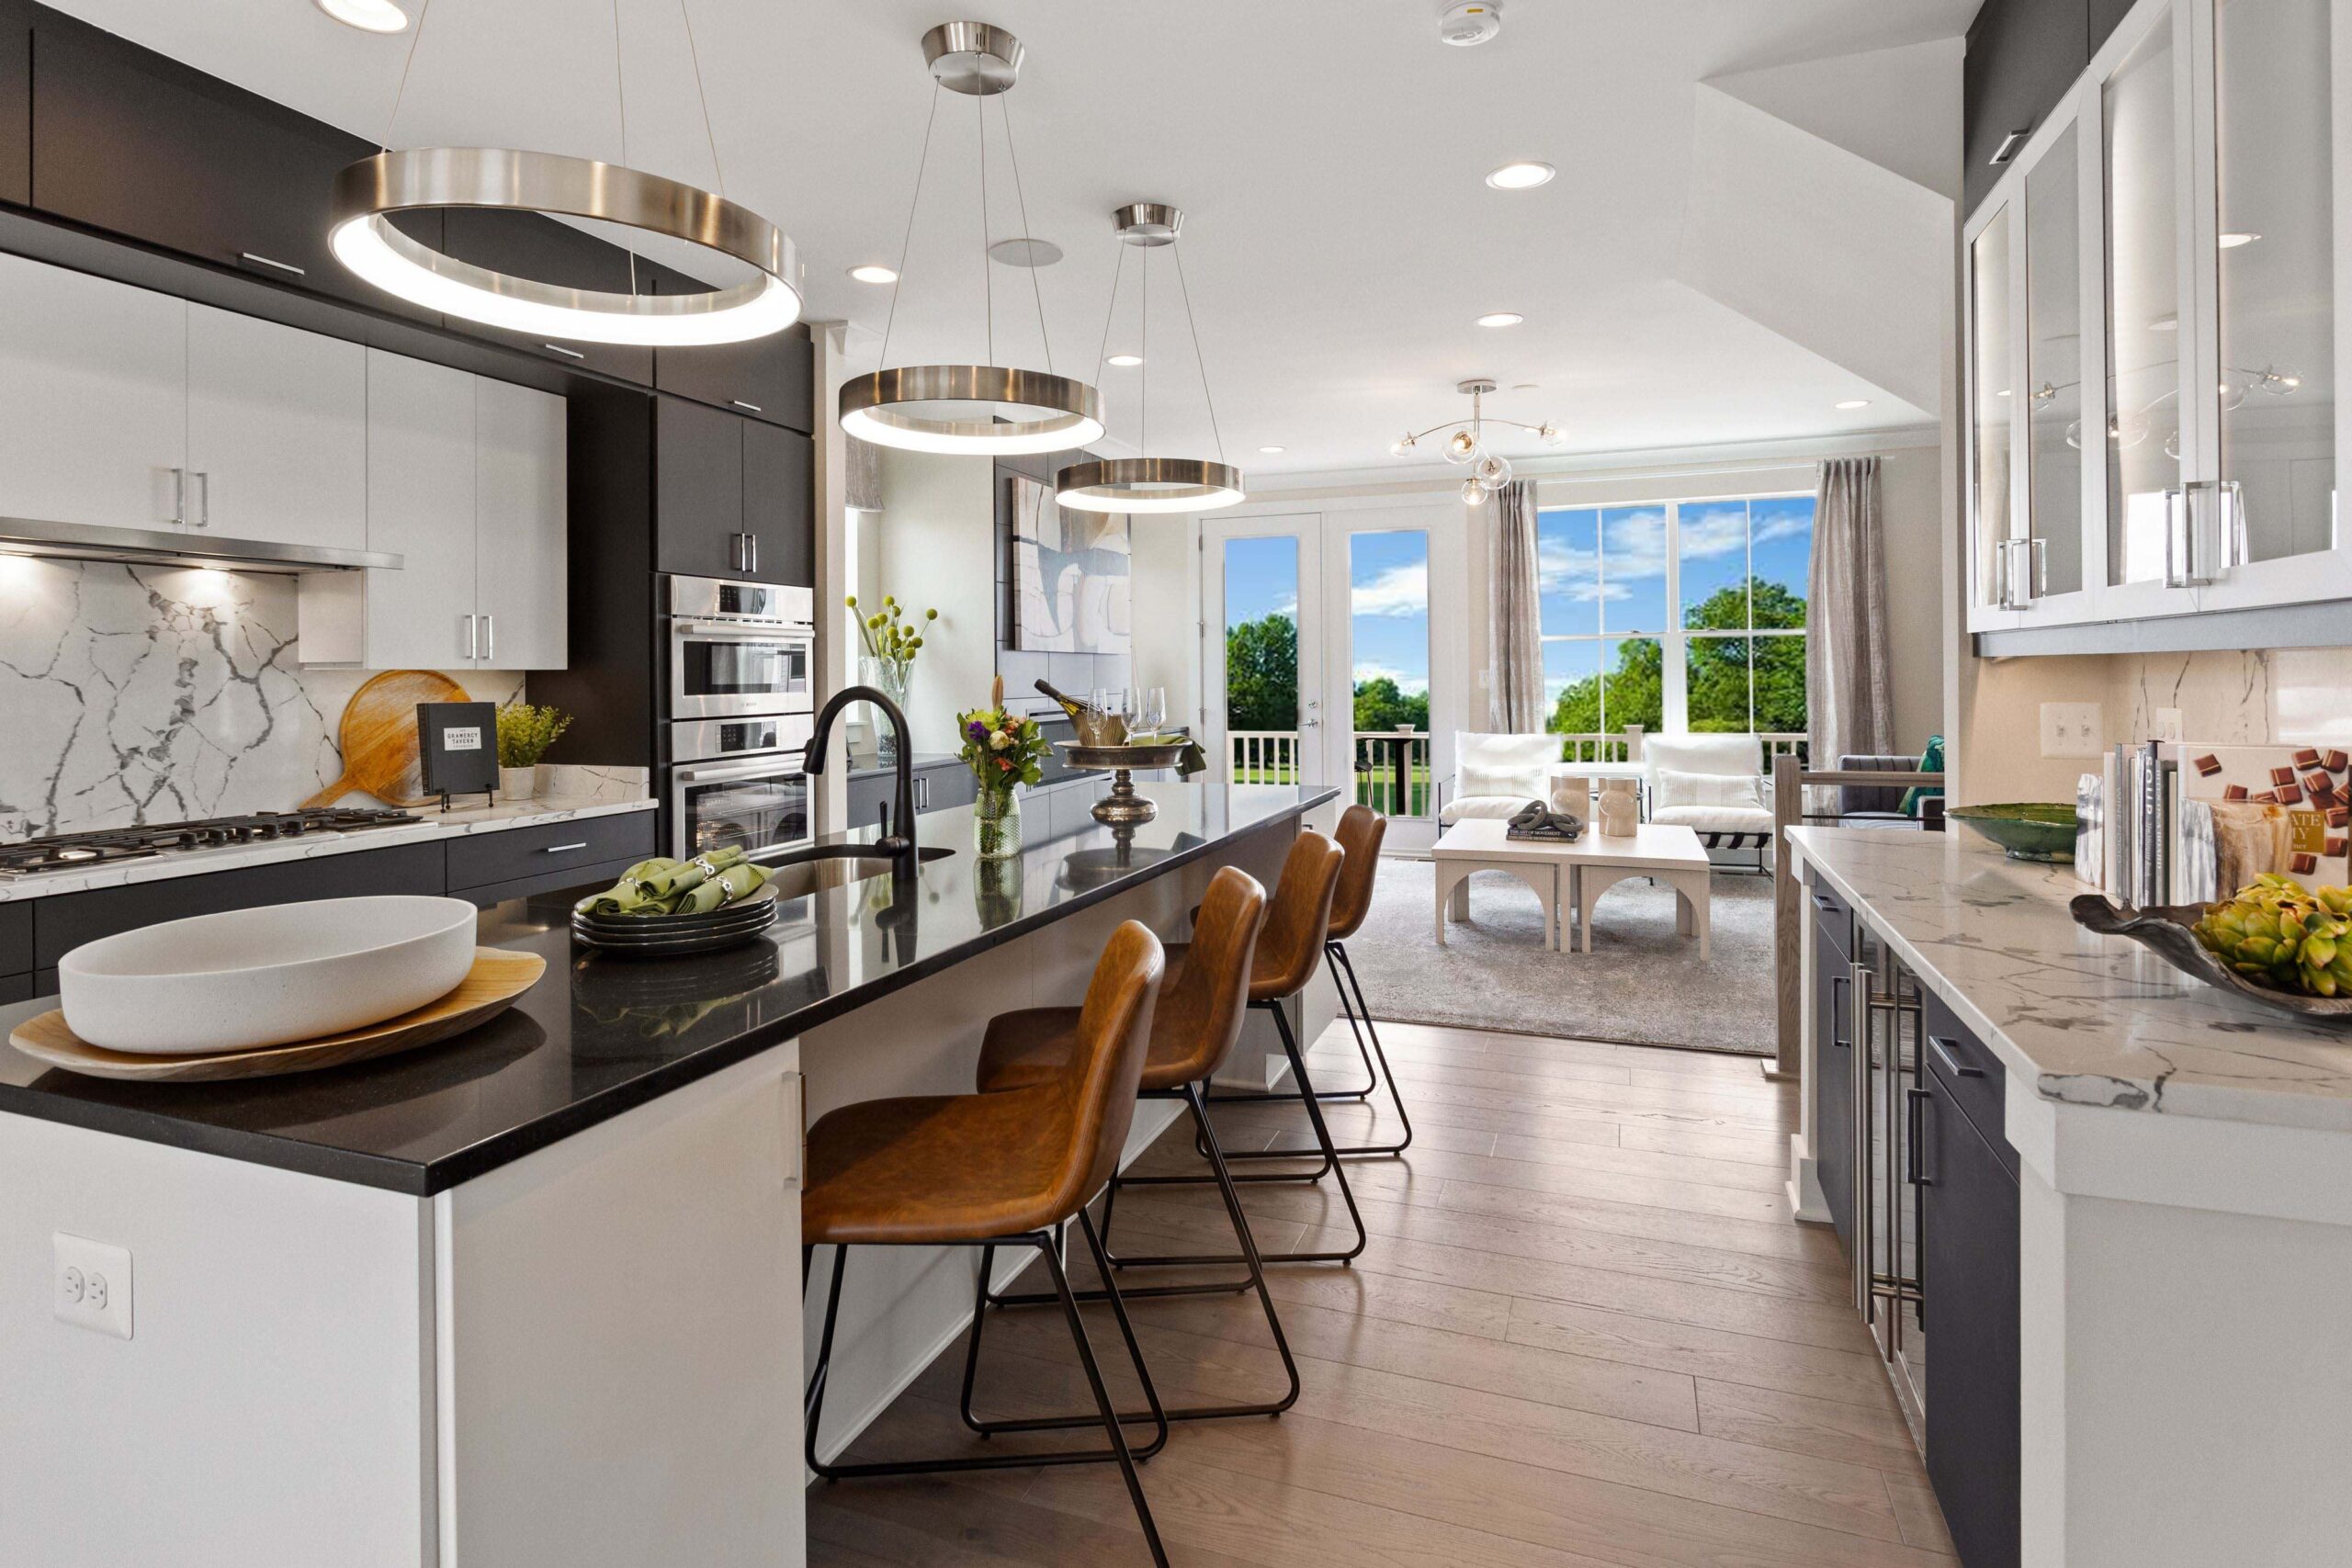 Why You Should Build New With Craftmark Homes